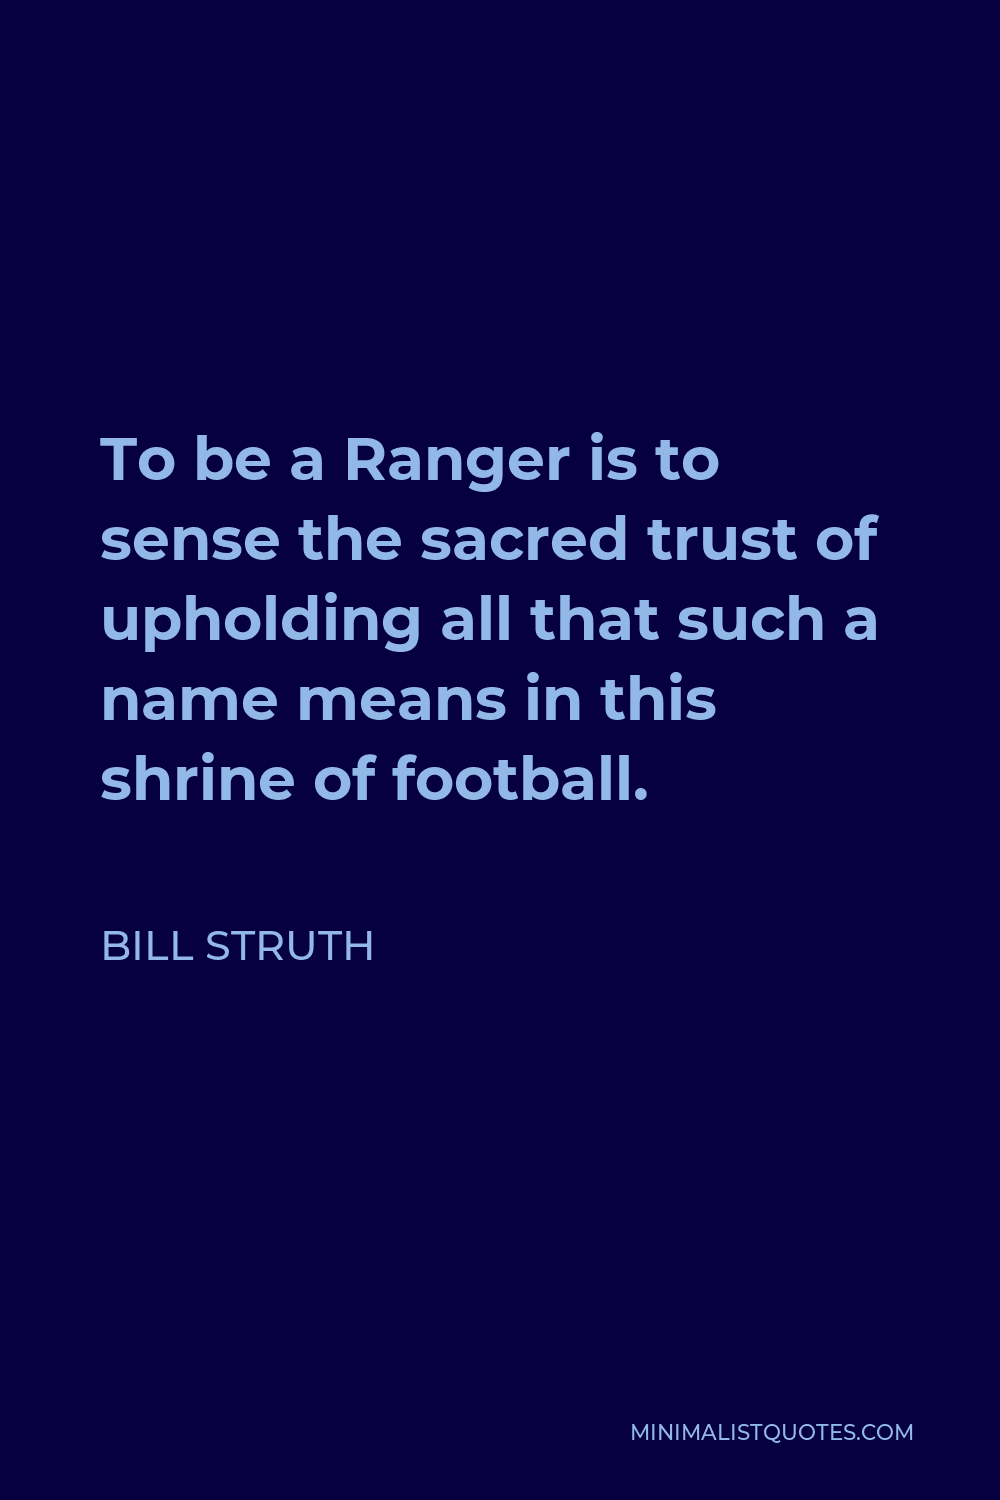 Bill Struth Quote - To be a Ranger is to sense the sacred trust of upholding all that such a name means in this shrine of football.